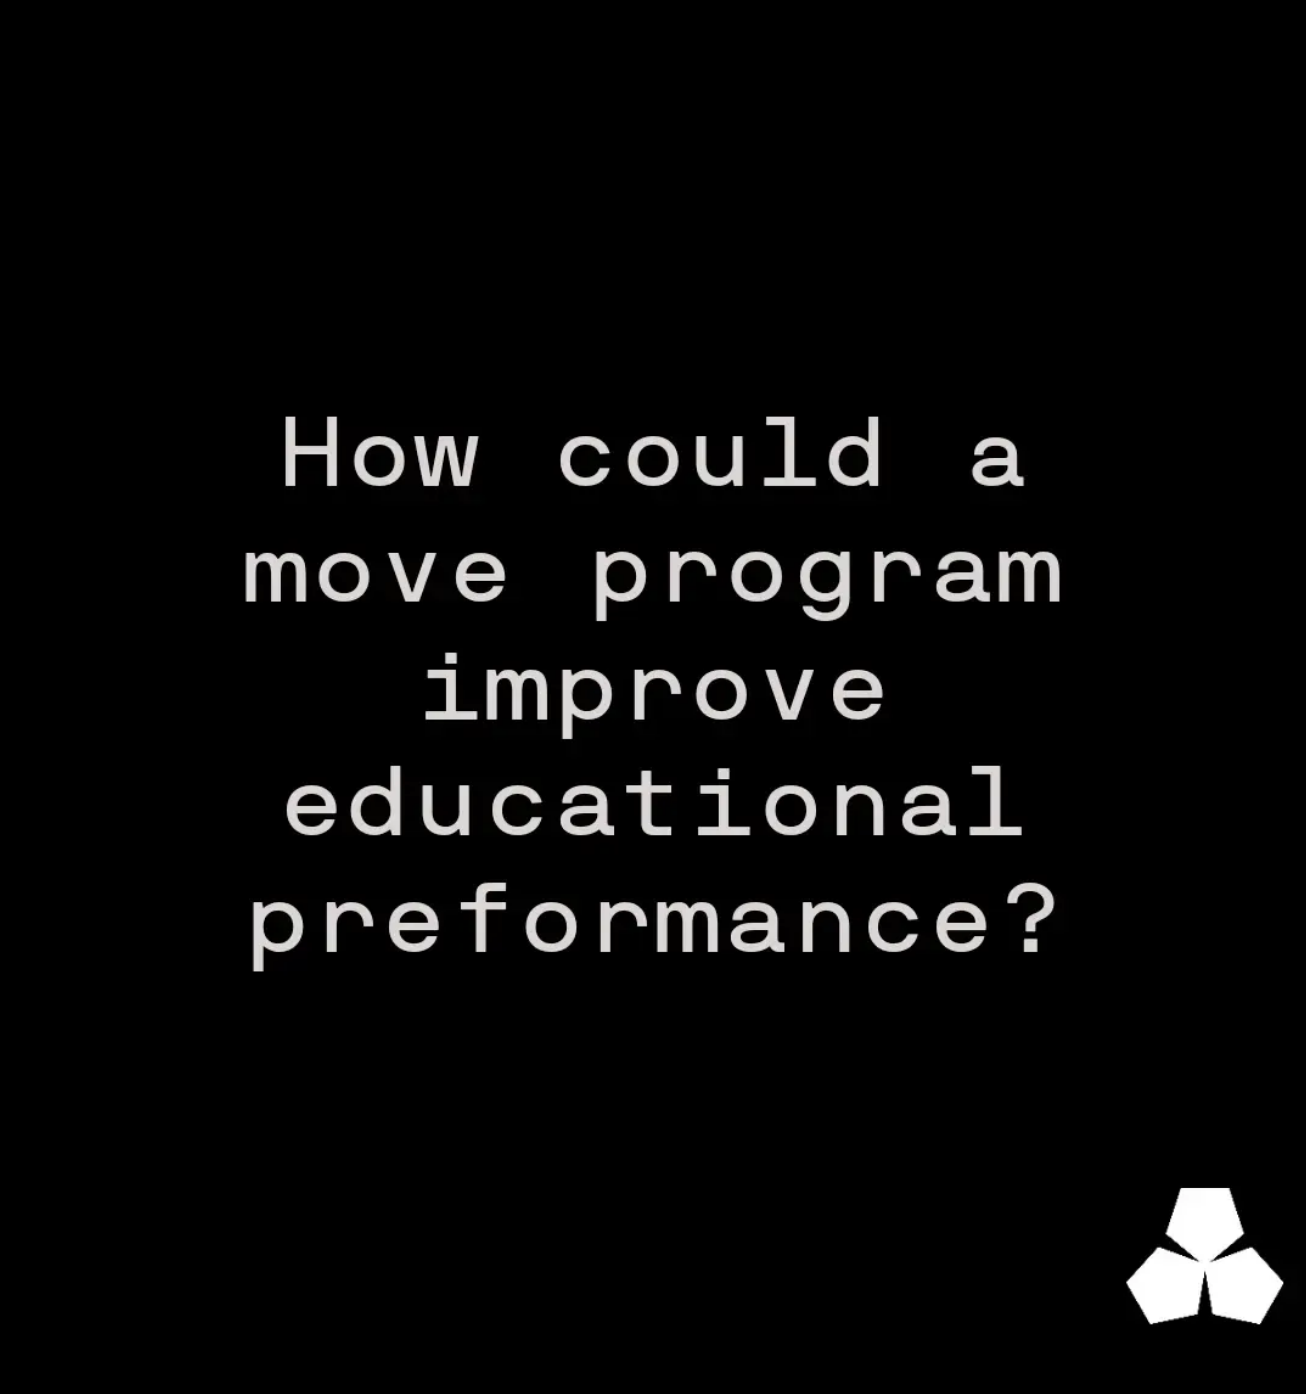 How Could a Move Program Improve Educational Performance?